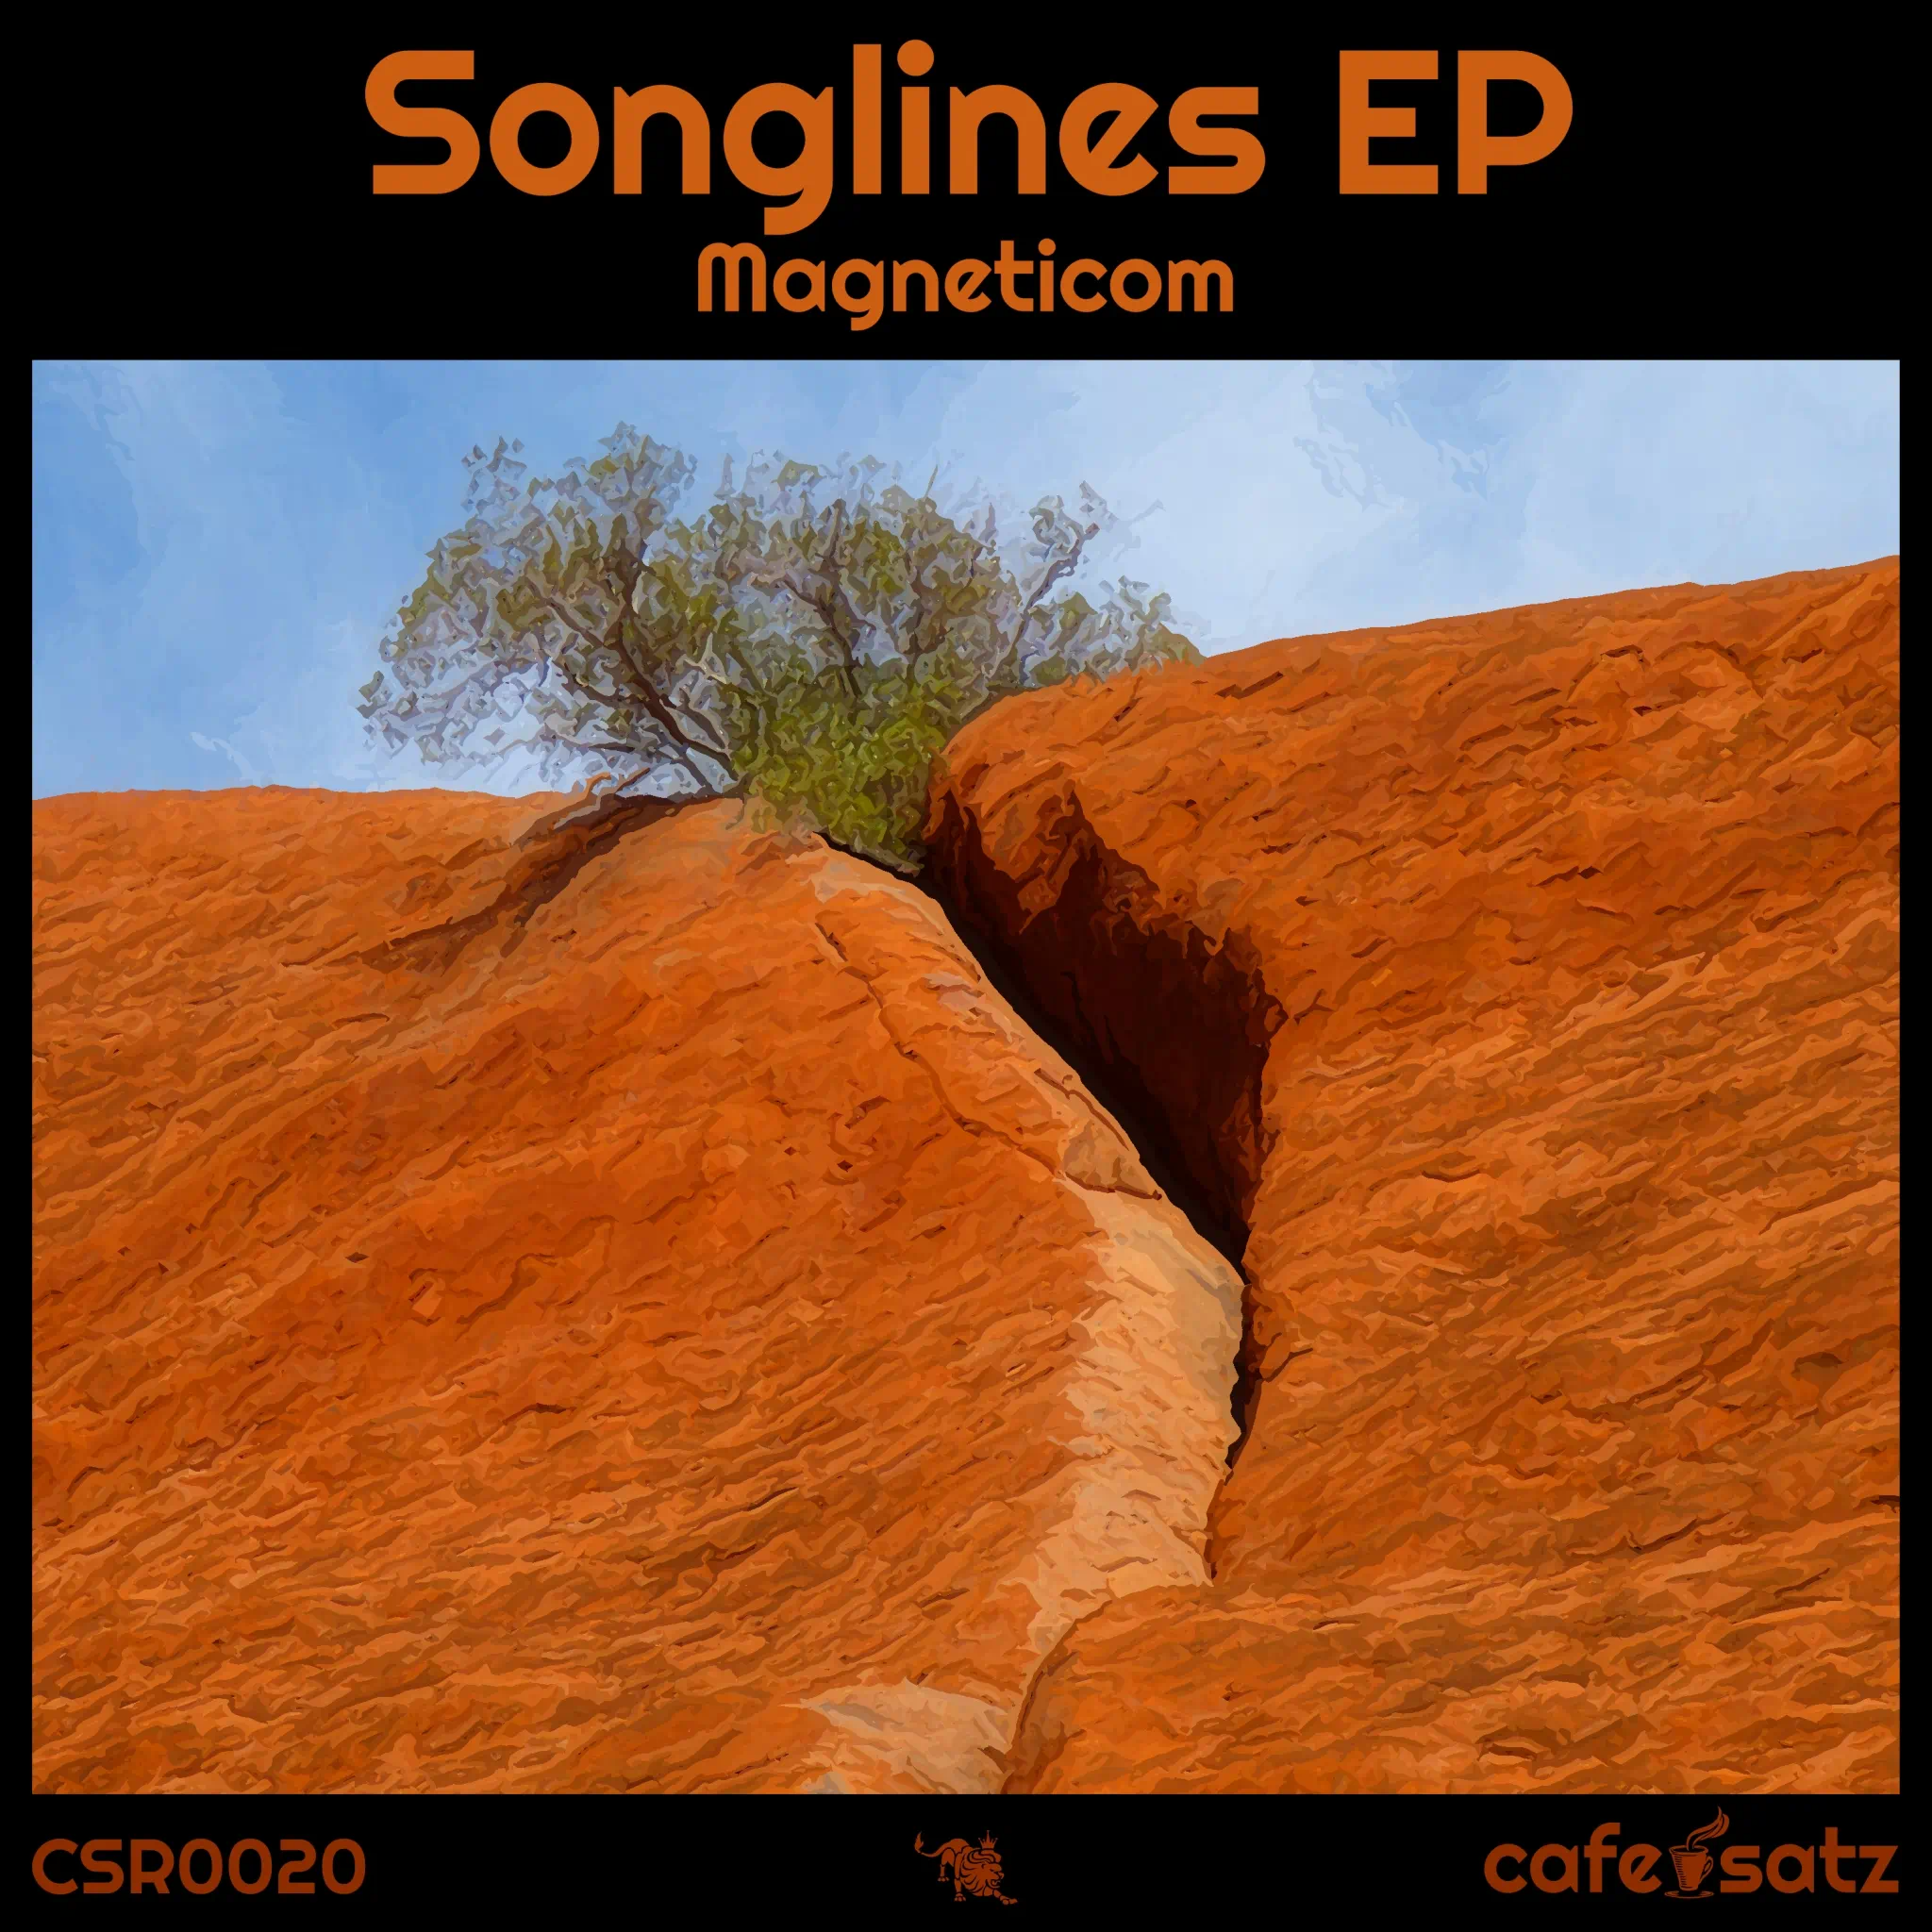 Magneticom - Songlines EP